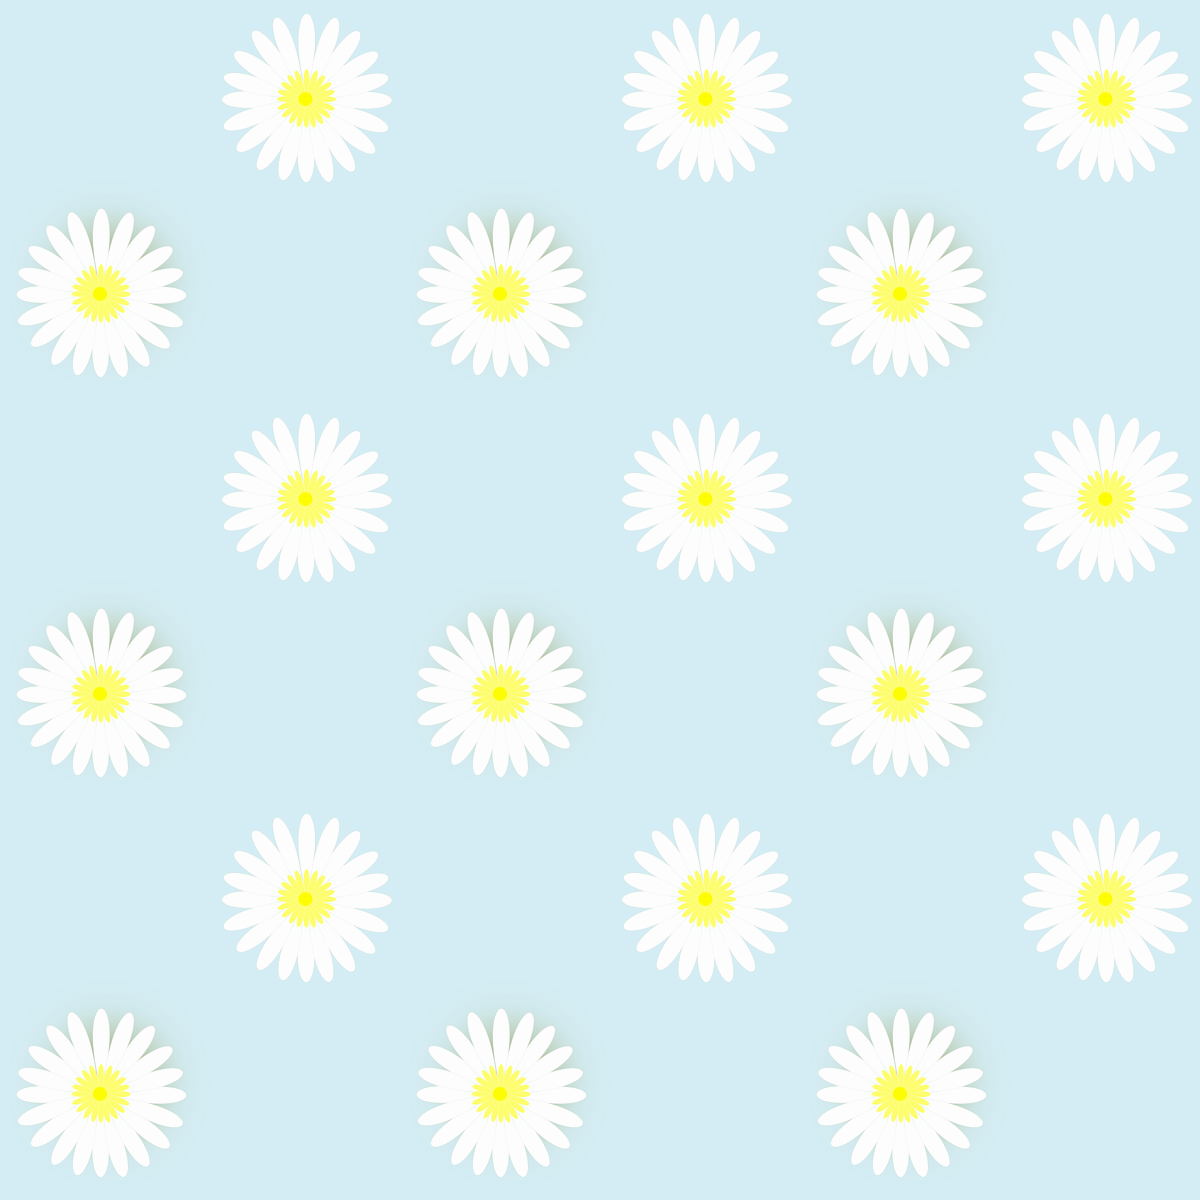 Paper Flower Pattern Printable Lovely Free Digital Daisy Flower Scrapbooking Papers